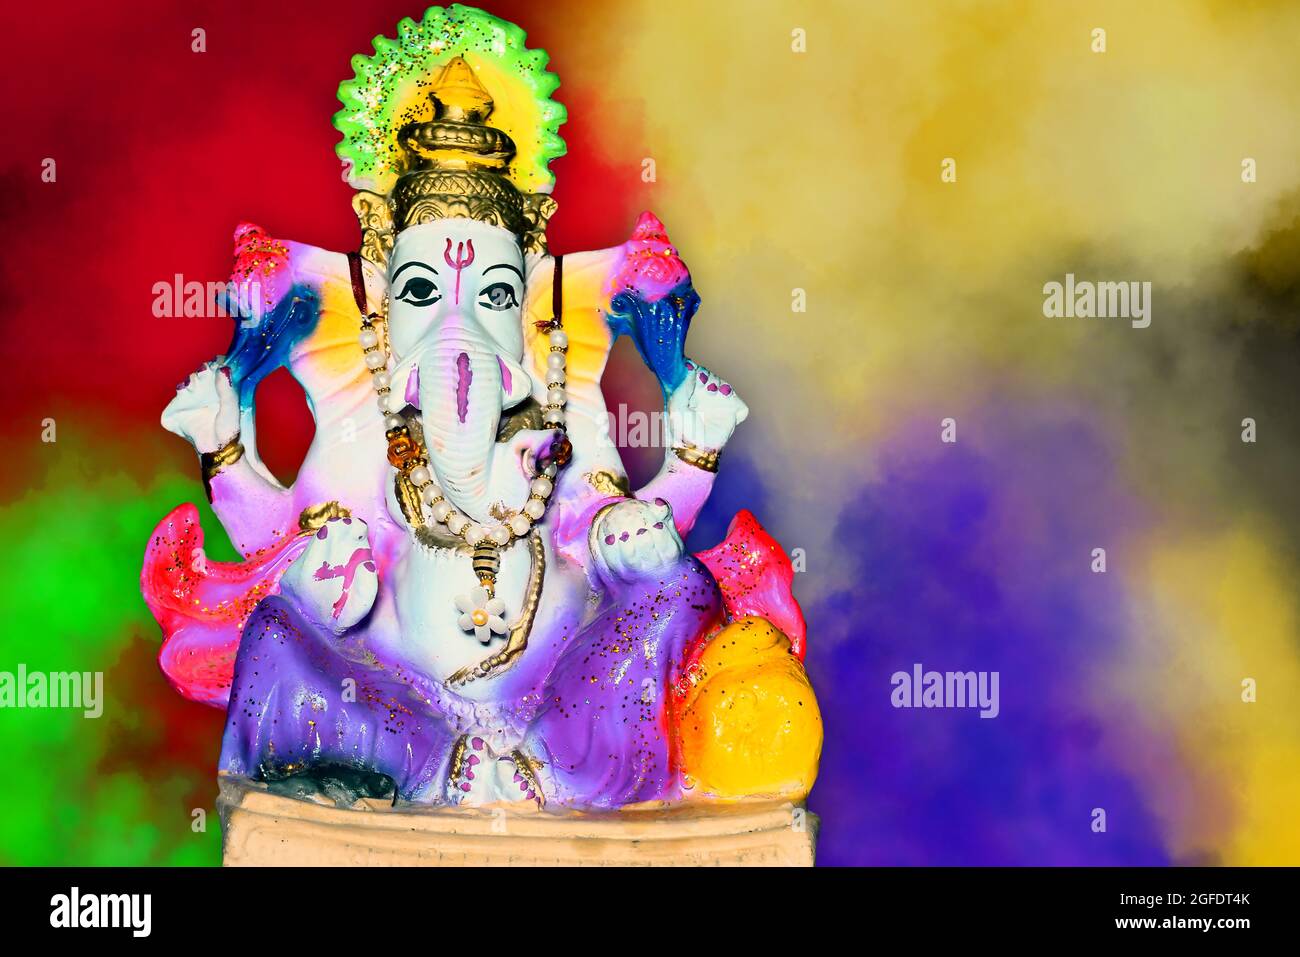 The lord of ganesha. Lord Ganesha on colorful Background, Hindu God Ganesha. Ganesha colorful Idol. Indian culture Stock Photo